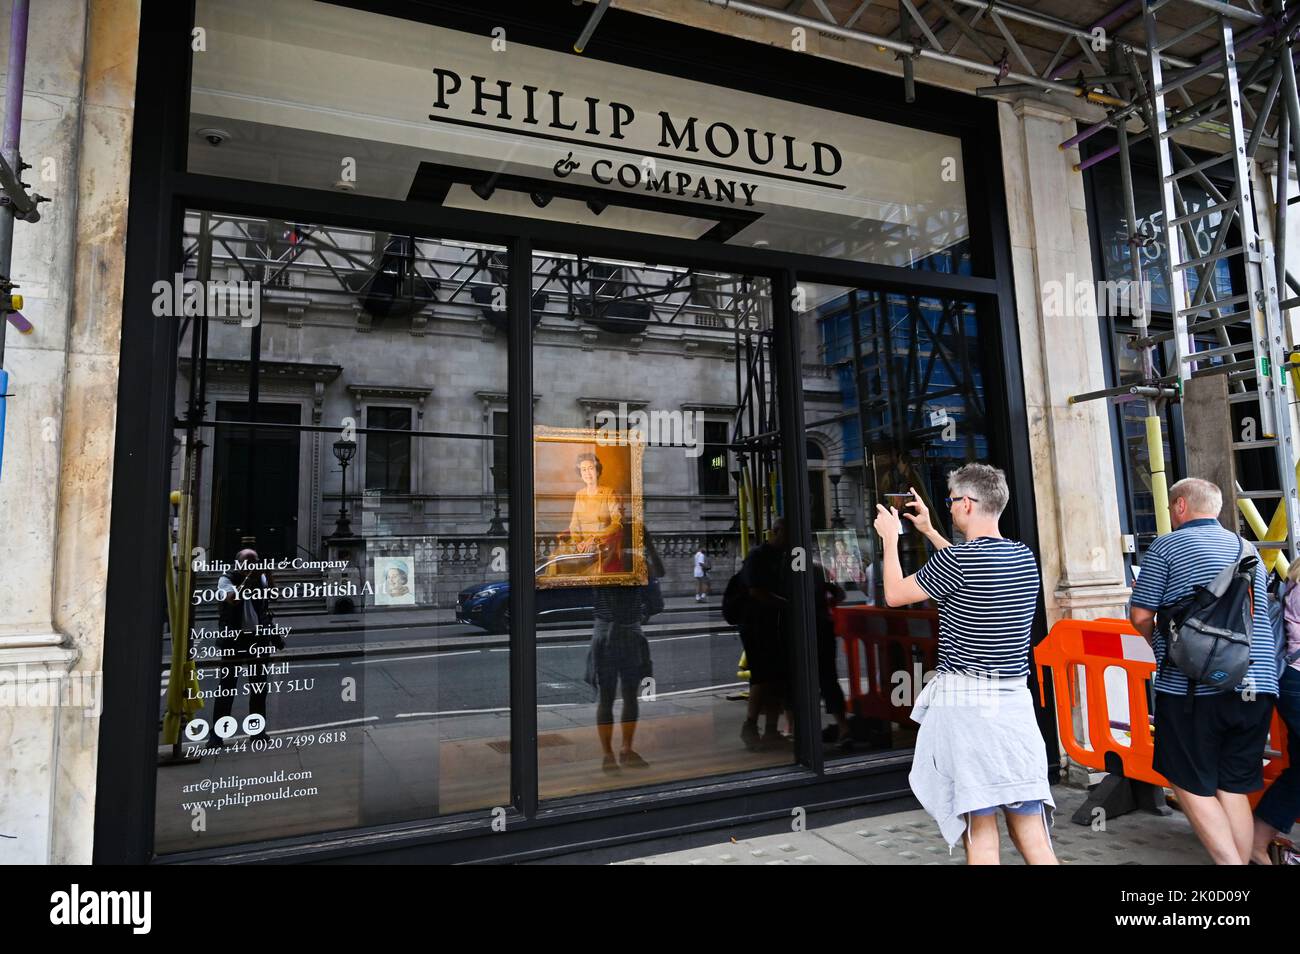 London UK 10th September 2022 - The Philip Mould & Company art dealers specialist in Pall Mall with a portrait of The Queen in the window after The Queen Elizabeth II died at the age of 96 on Thursday 8th September 2022   Photograph taken by Simon Dack Stock Photo